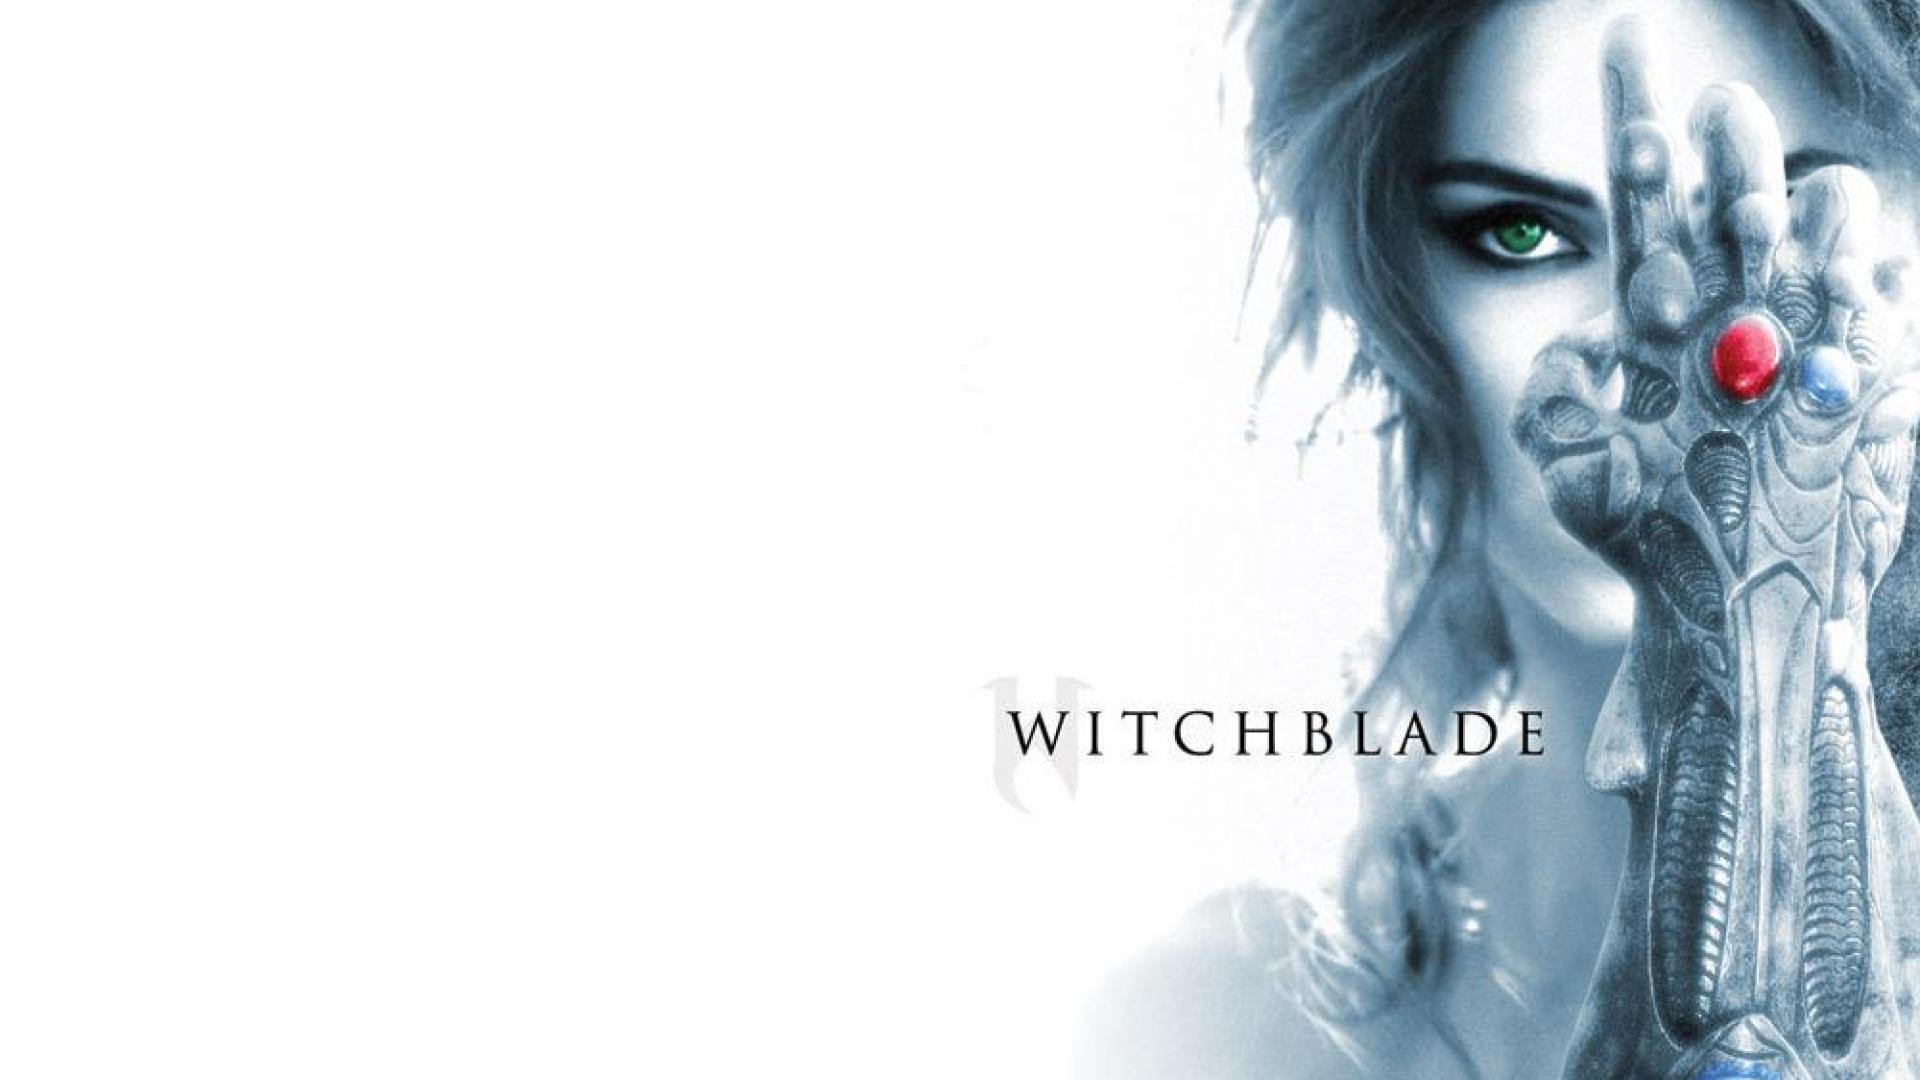 Witchblade Wallpaper HD Pw